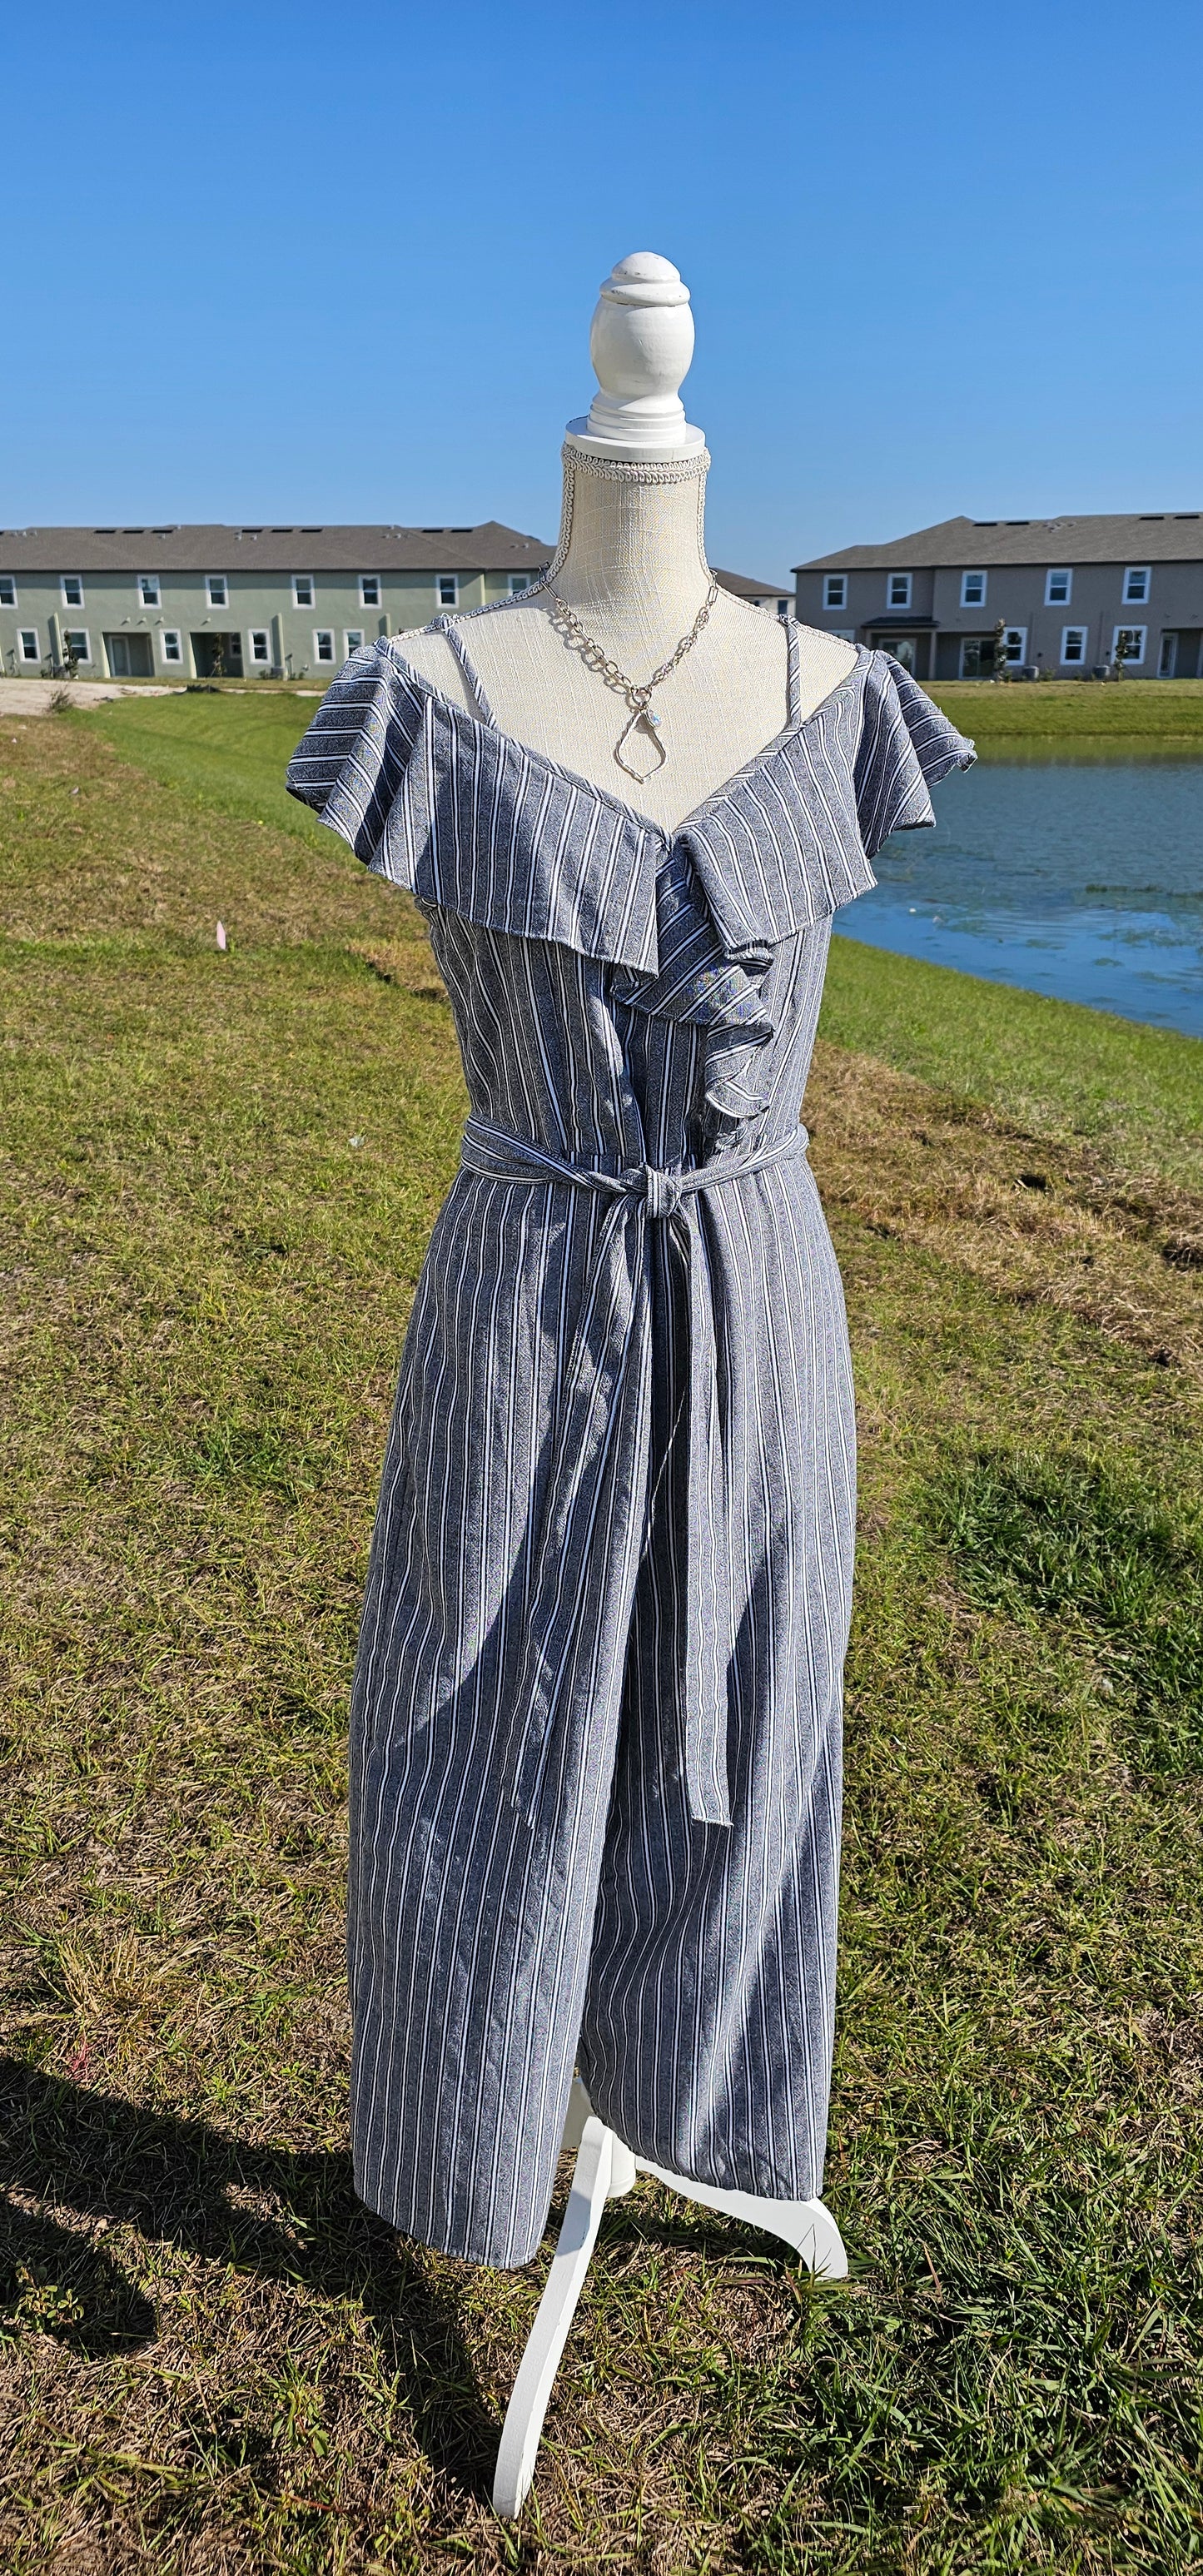 How adorable is the “Cool Breeze” jumpsuit. This jumpsuit features spaghetti straps that are adjustable, ruffled cold shoulder sleeves, ruffles down front in shape of a v, material tie belt for around waist, wide cropped legs, the pants have pockets, zipper and eyelet hook in back, and has gray, white, and black stripes. Just slip it on and you are ready for the day!&nbsp; I hear that a vacation is planned.&nbsp; What a great item to pack in your suitcase. Sizes small through large.